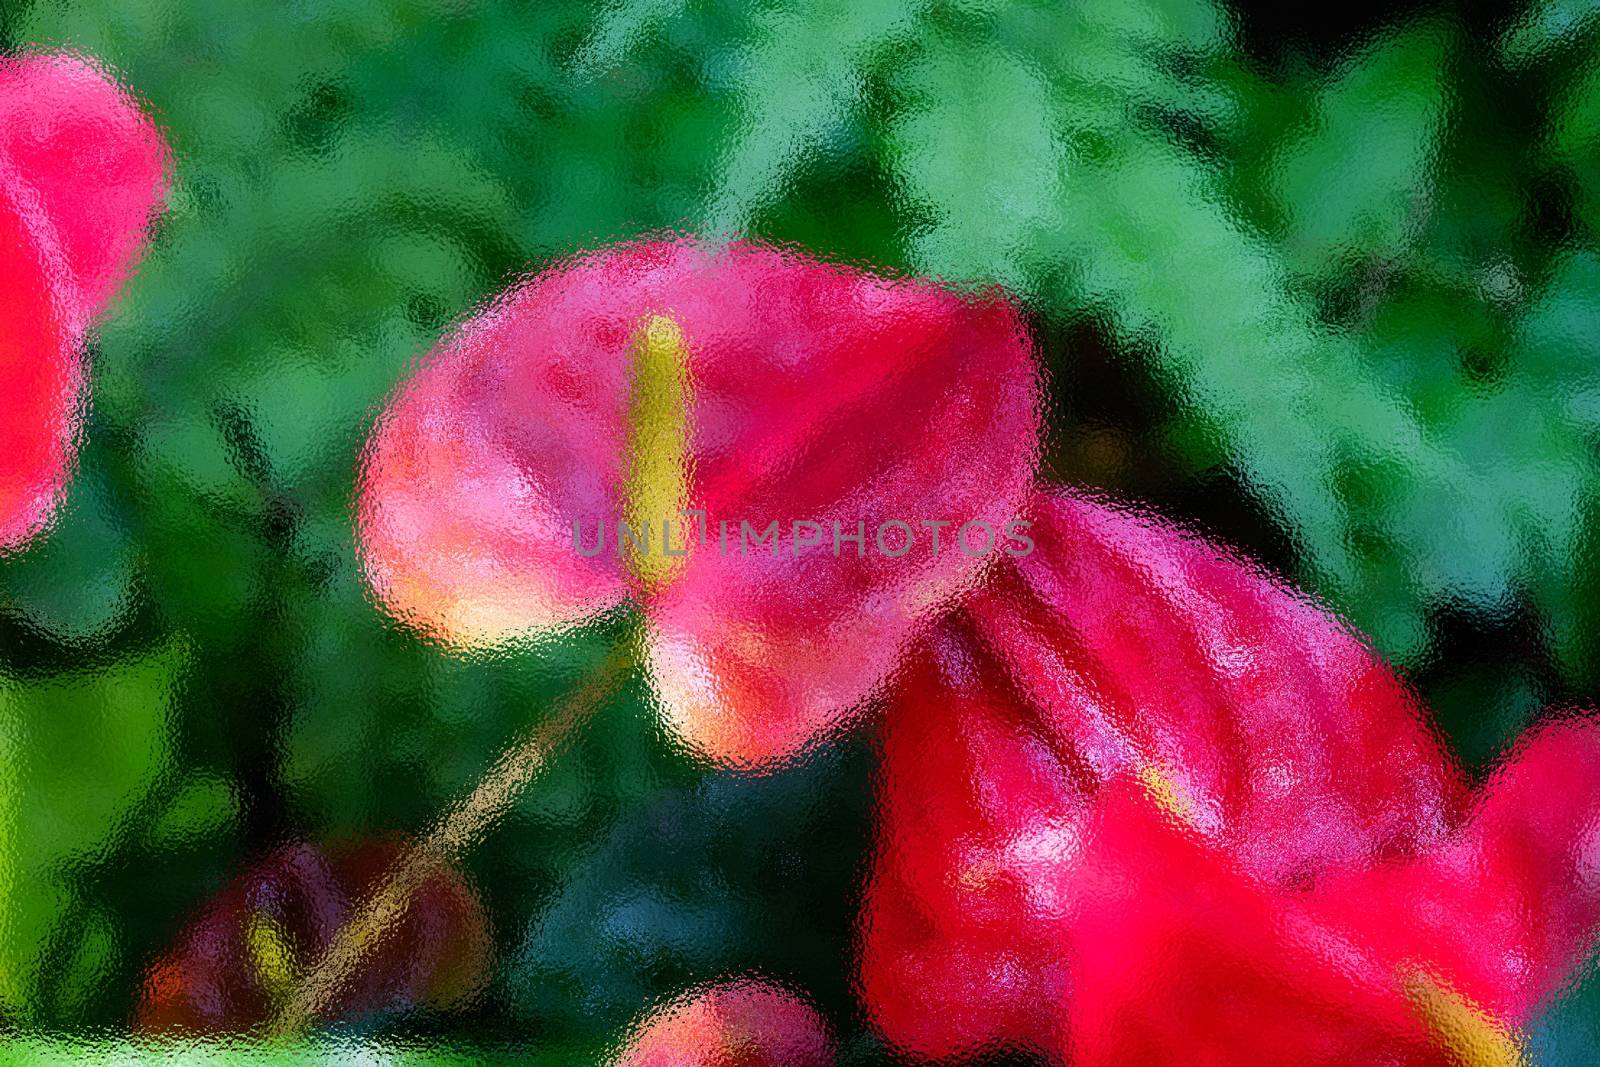 Abstract frosted glass image on Anthurium is a red heart-shaped flower. Dark green leaves as a background make the flowers stand out beautifully. Anthuriums have come to symbolize hospitality. by peerapixs